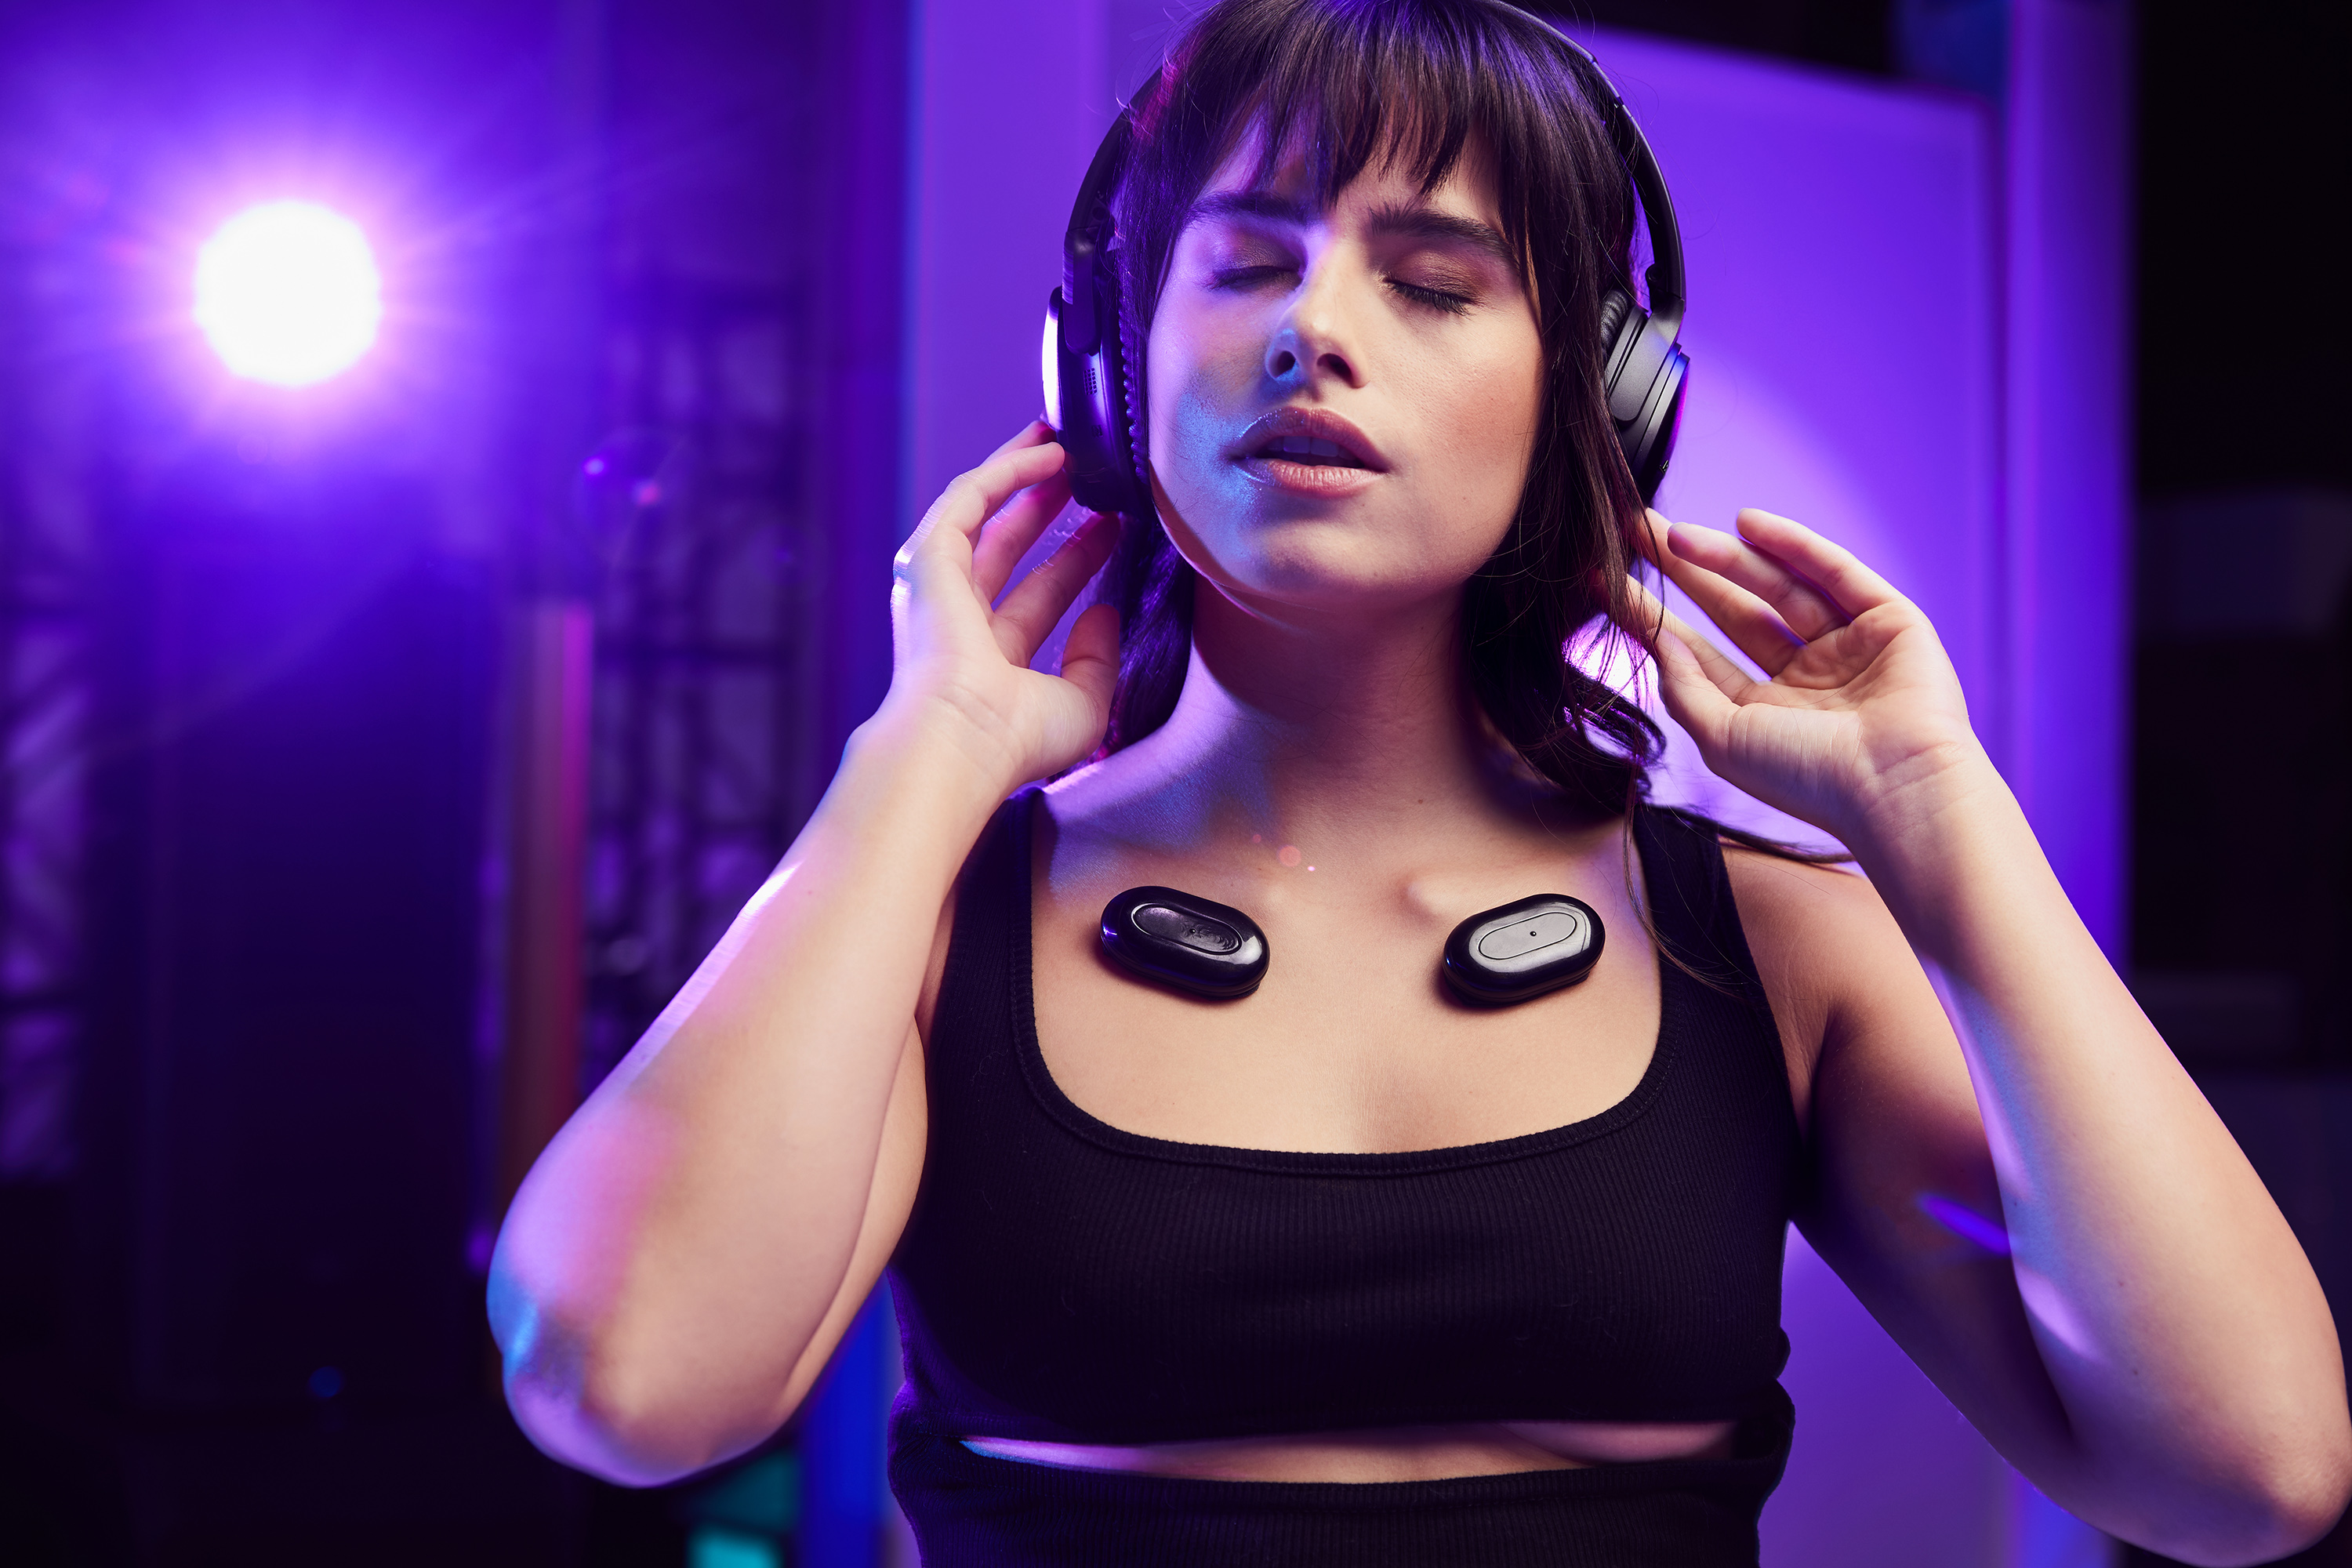 BodyRocks has developed a hardware and software technology system that delivers a deeply immersive and customized wireless music tactile experience.